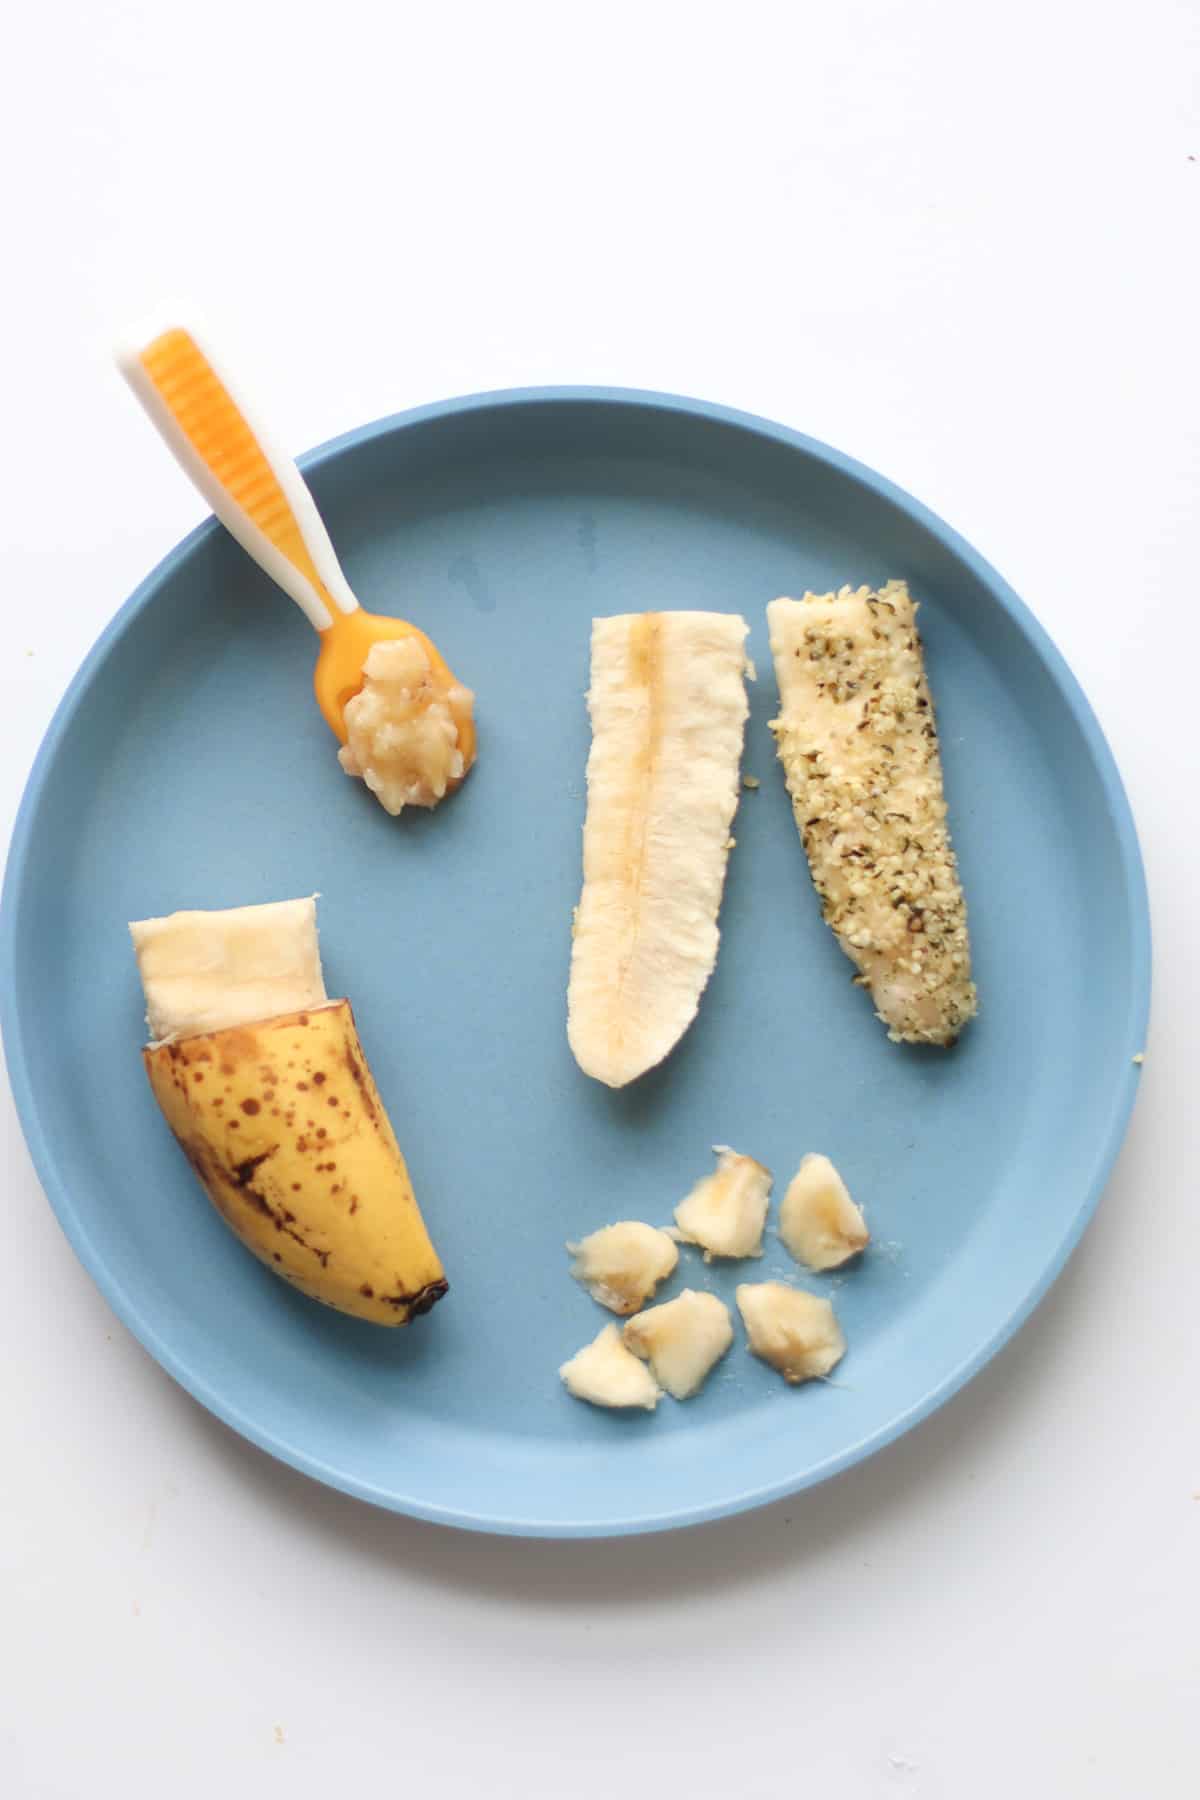 Banana with peel on, banana spears, mashed, and cut into bite-sized pieces.